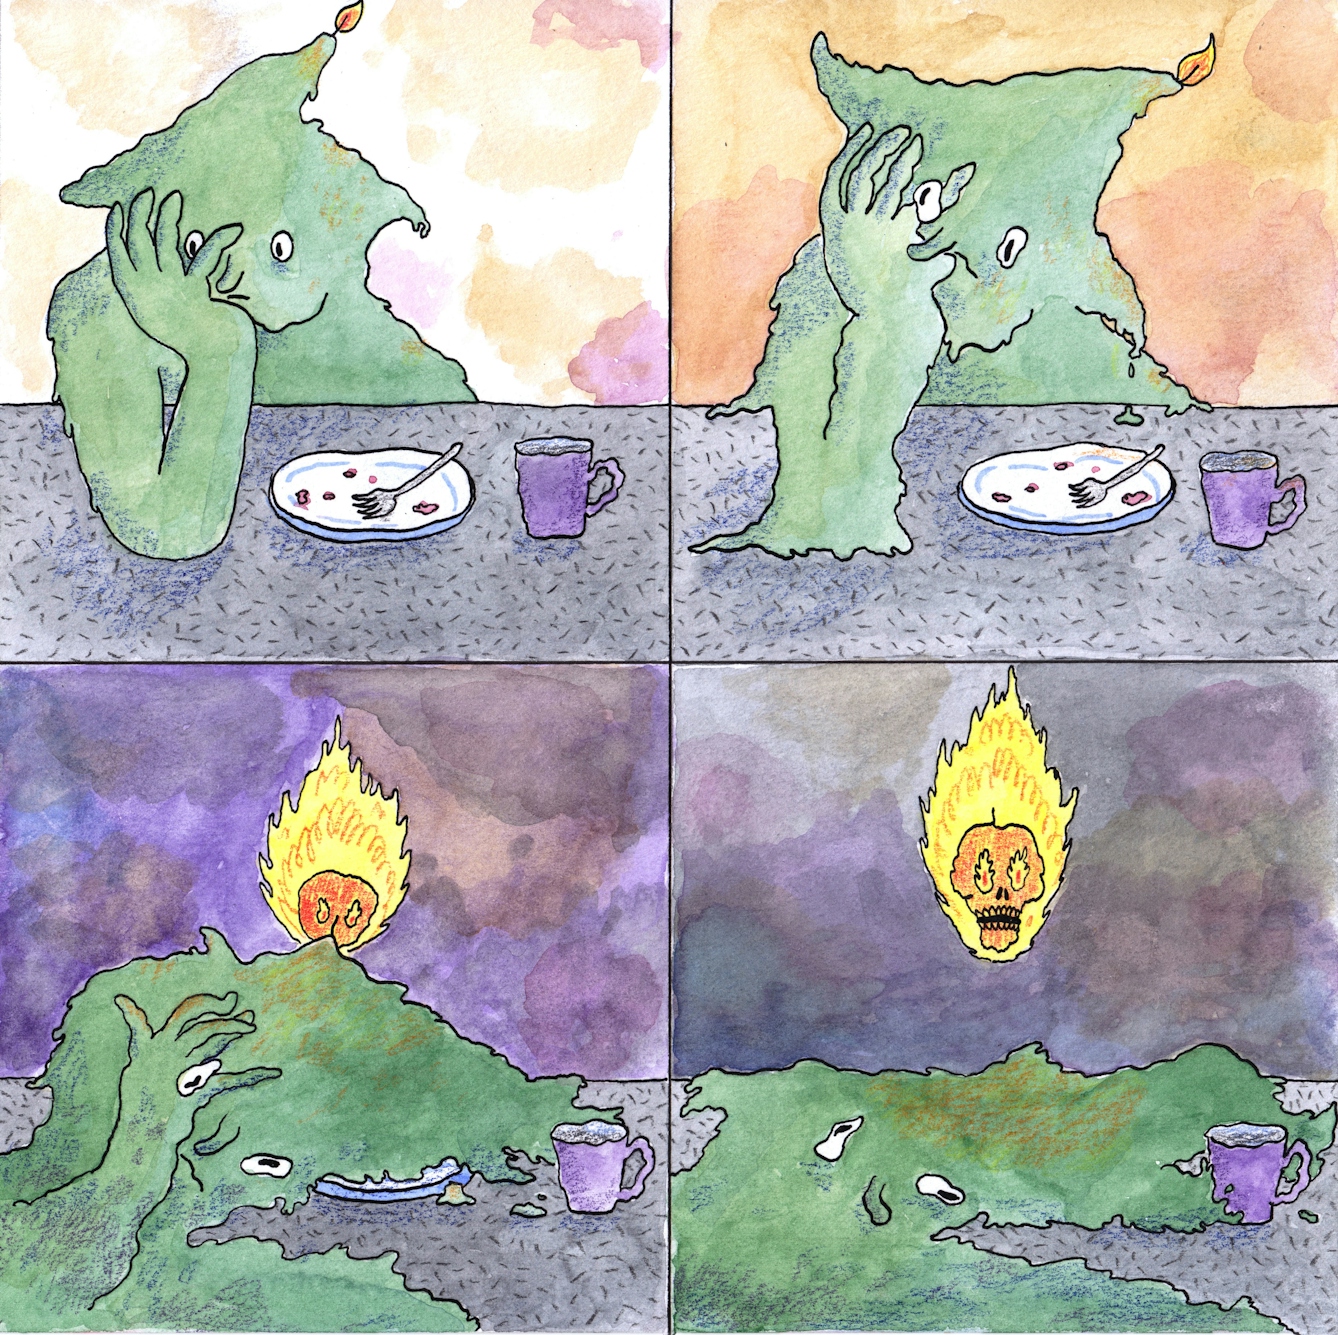 Four-panel comic depicting a sad candle leaning on its hand with an empty plate and mug in front of it. As the panels progress, the candle-person melts leaving only a puddle and a flaming skull.